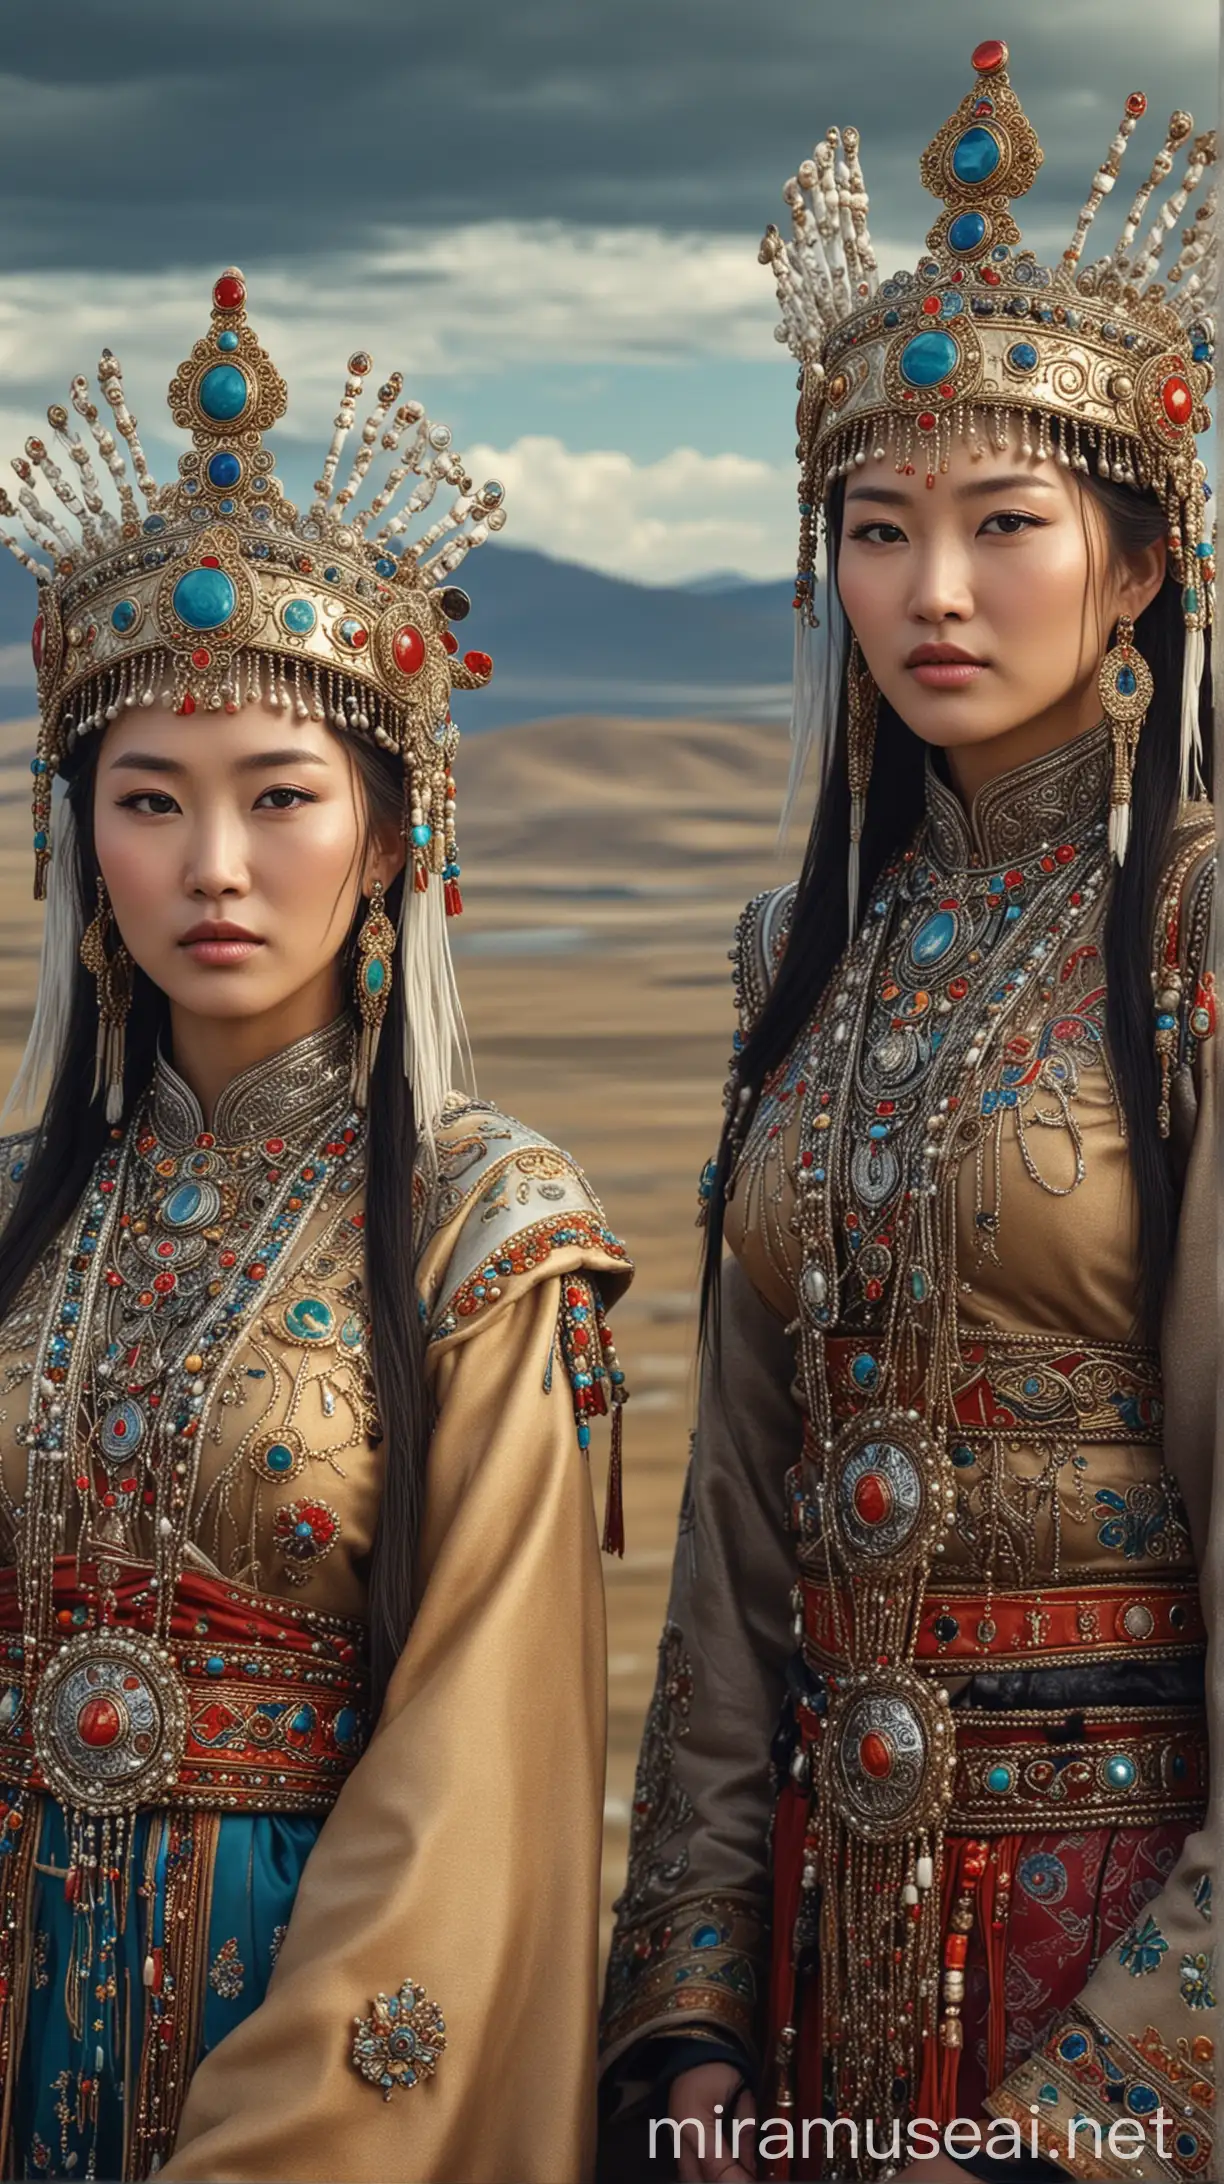 A depiction of Mongol women wearing elaborate headdresses, with jewels and finery adorning their heads, against the backdrop of the vast Mongolian landscape. hyper realistic